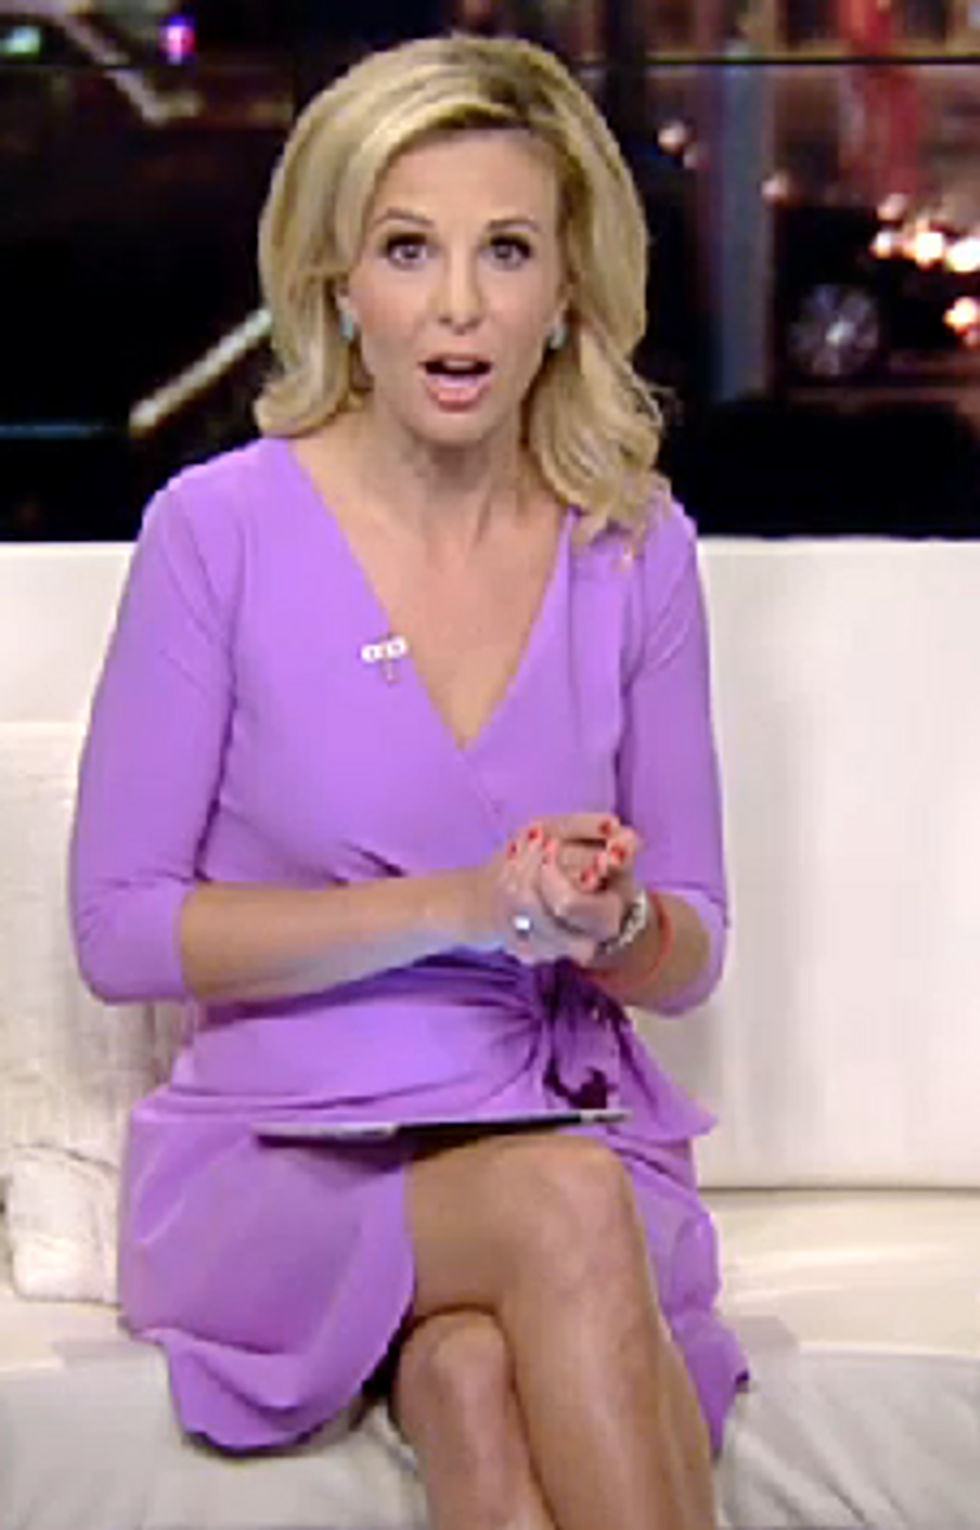 Fox Blonde Elisabeth Hasselbeck Suddenly Wants To Spend More Time With Her Kids, Suddenly